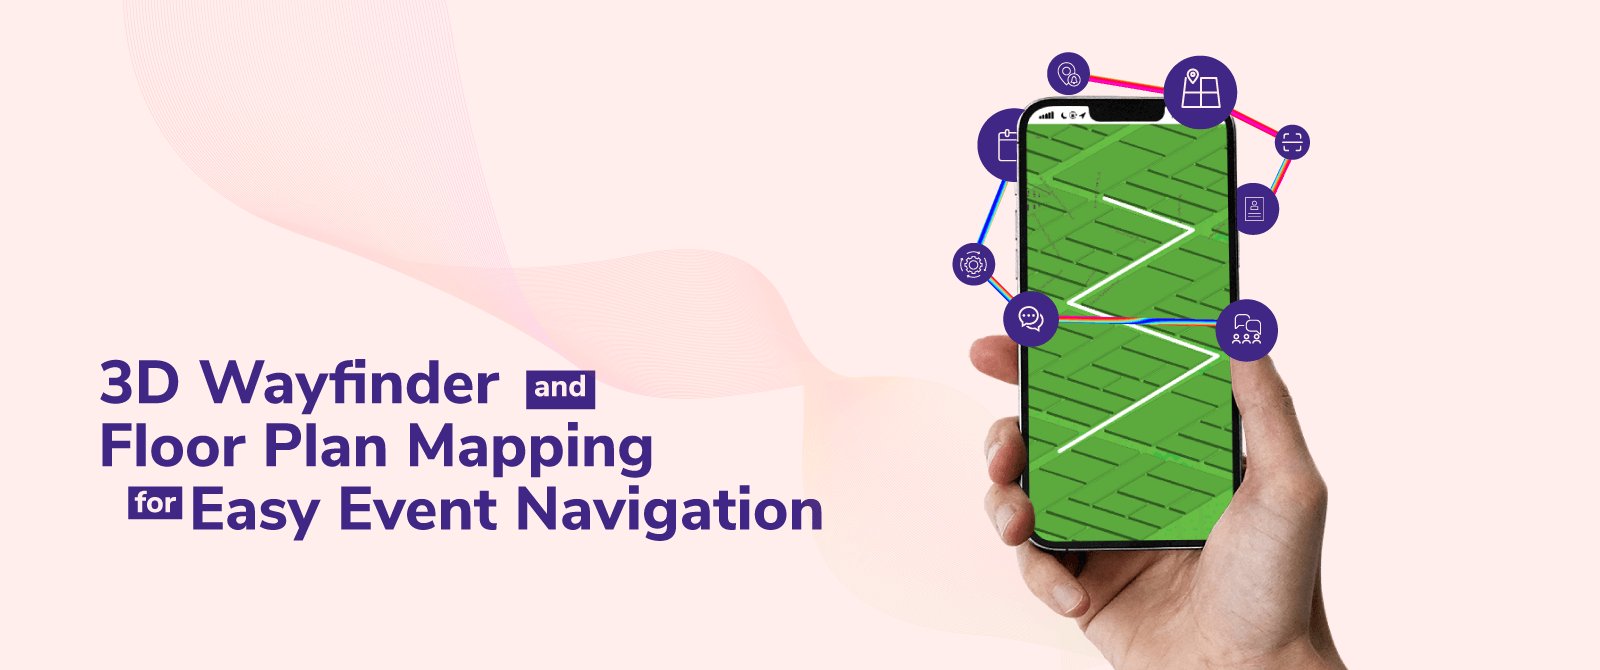 3D Wayfinder and Floor Plan Mapping for Easy Event Navigation